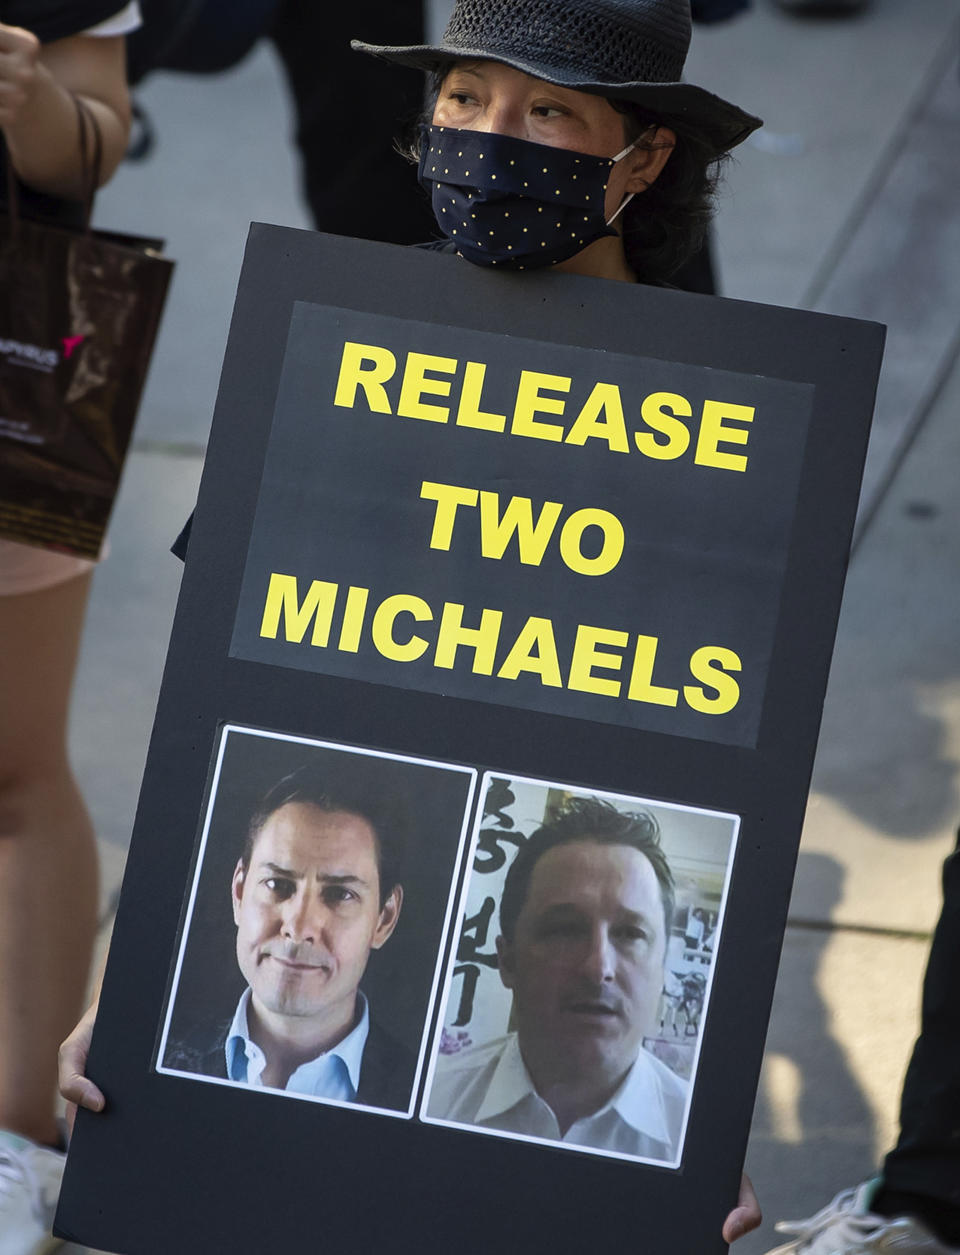 FILE - In this Aug. 16, 2020, file photo, a woman holds a sign with images of Michael Kovrig, left, and Michael Spavor, who have been detained in China since December 2018, during a rally in support of Hong Kong democracy, in Vancouver, Canada. A Communist Party newspaper says China will soon begin trials for the two Canadians in apparent retaliation for Canada’s detention of a senior executive for Chinese communications giant Huawei Technologies. (Darryl Dyck/The Canadian Press via AP)